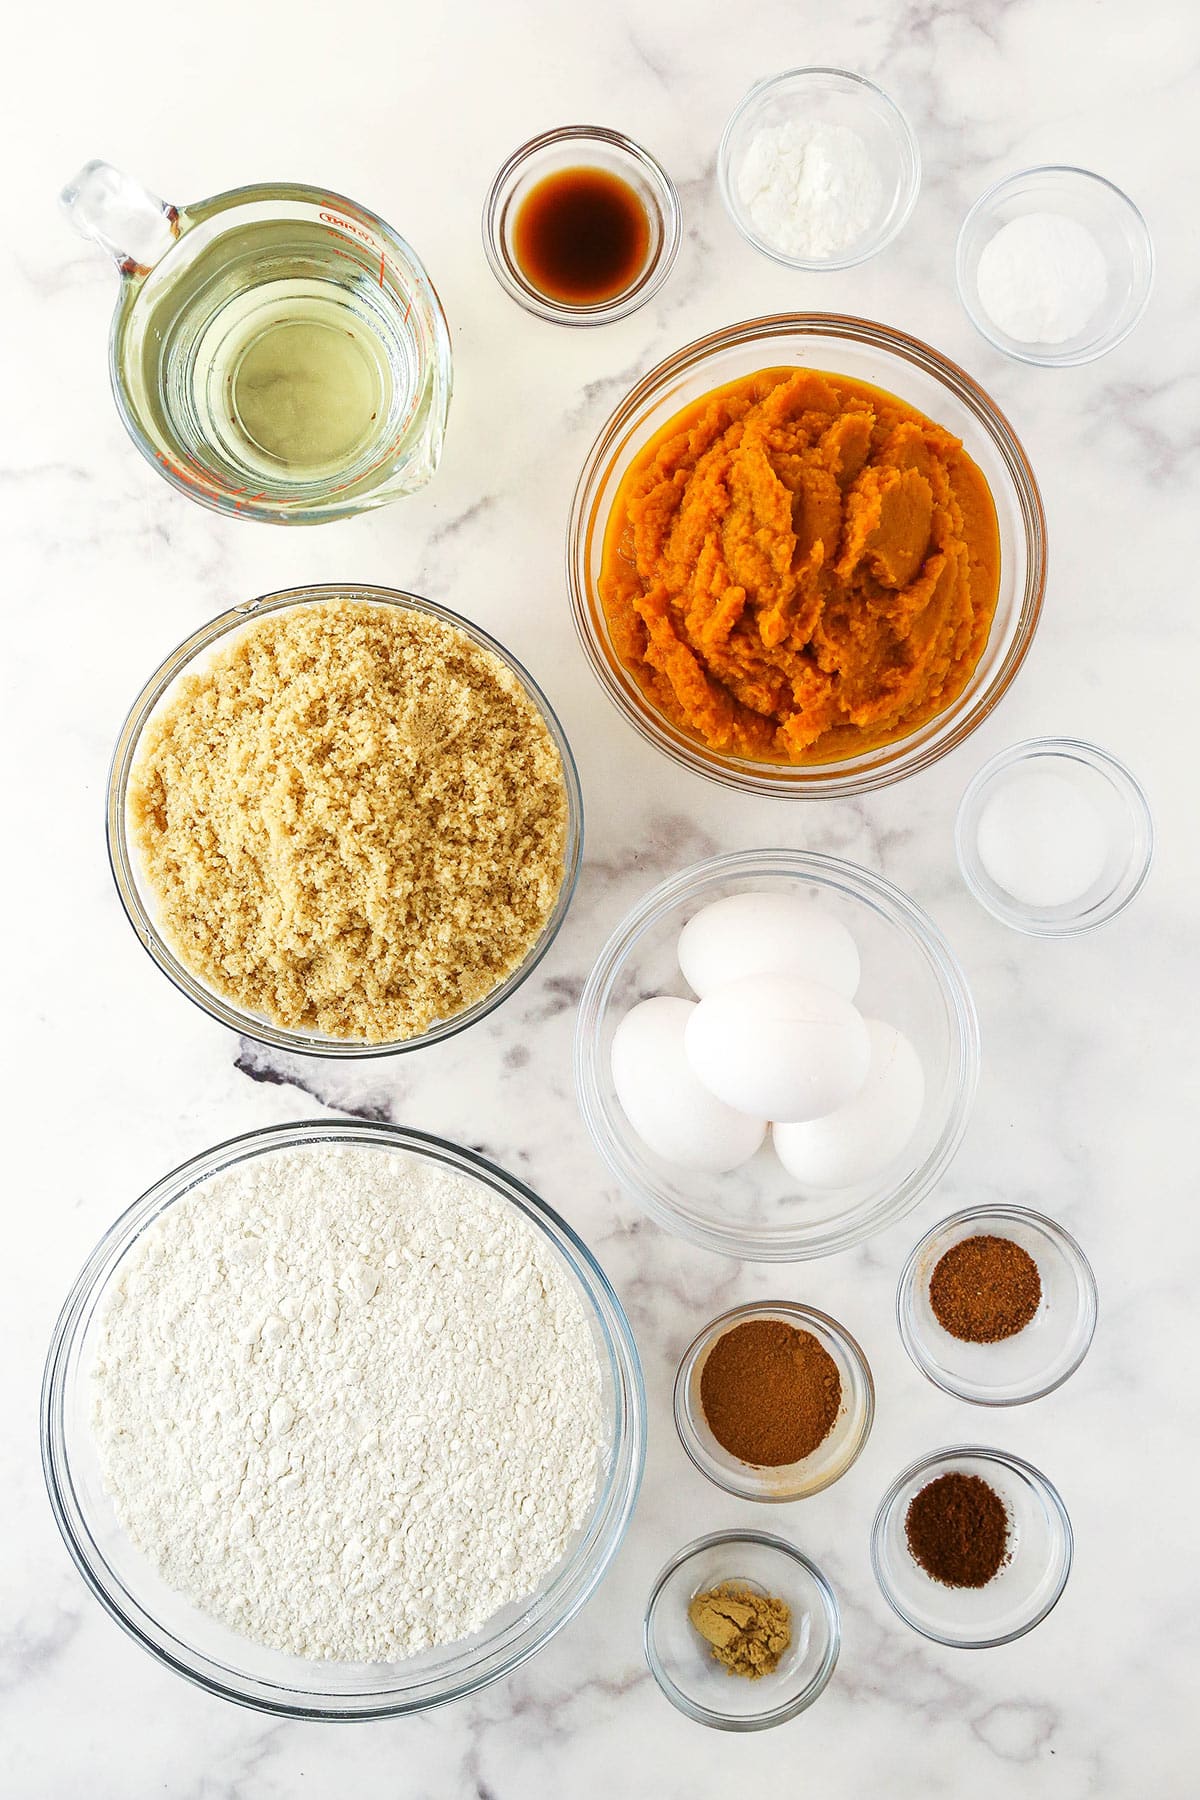 Eggs, cinnamon, nutmeg, ginger and the rest of the ingredients arranged neatly on a kitchen countertop